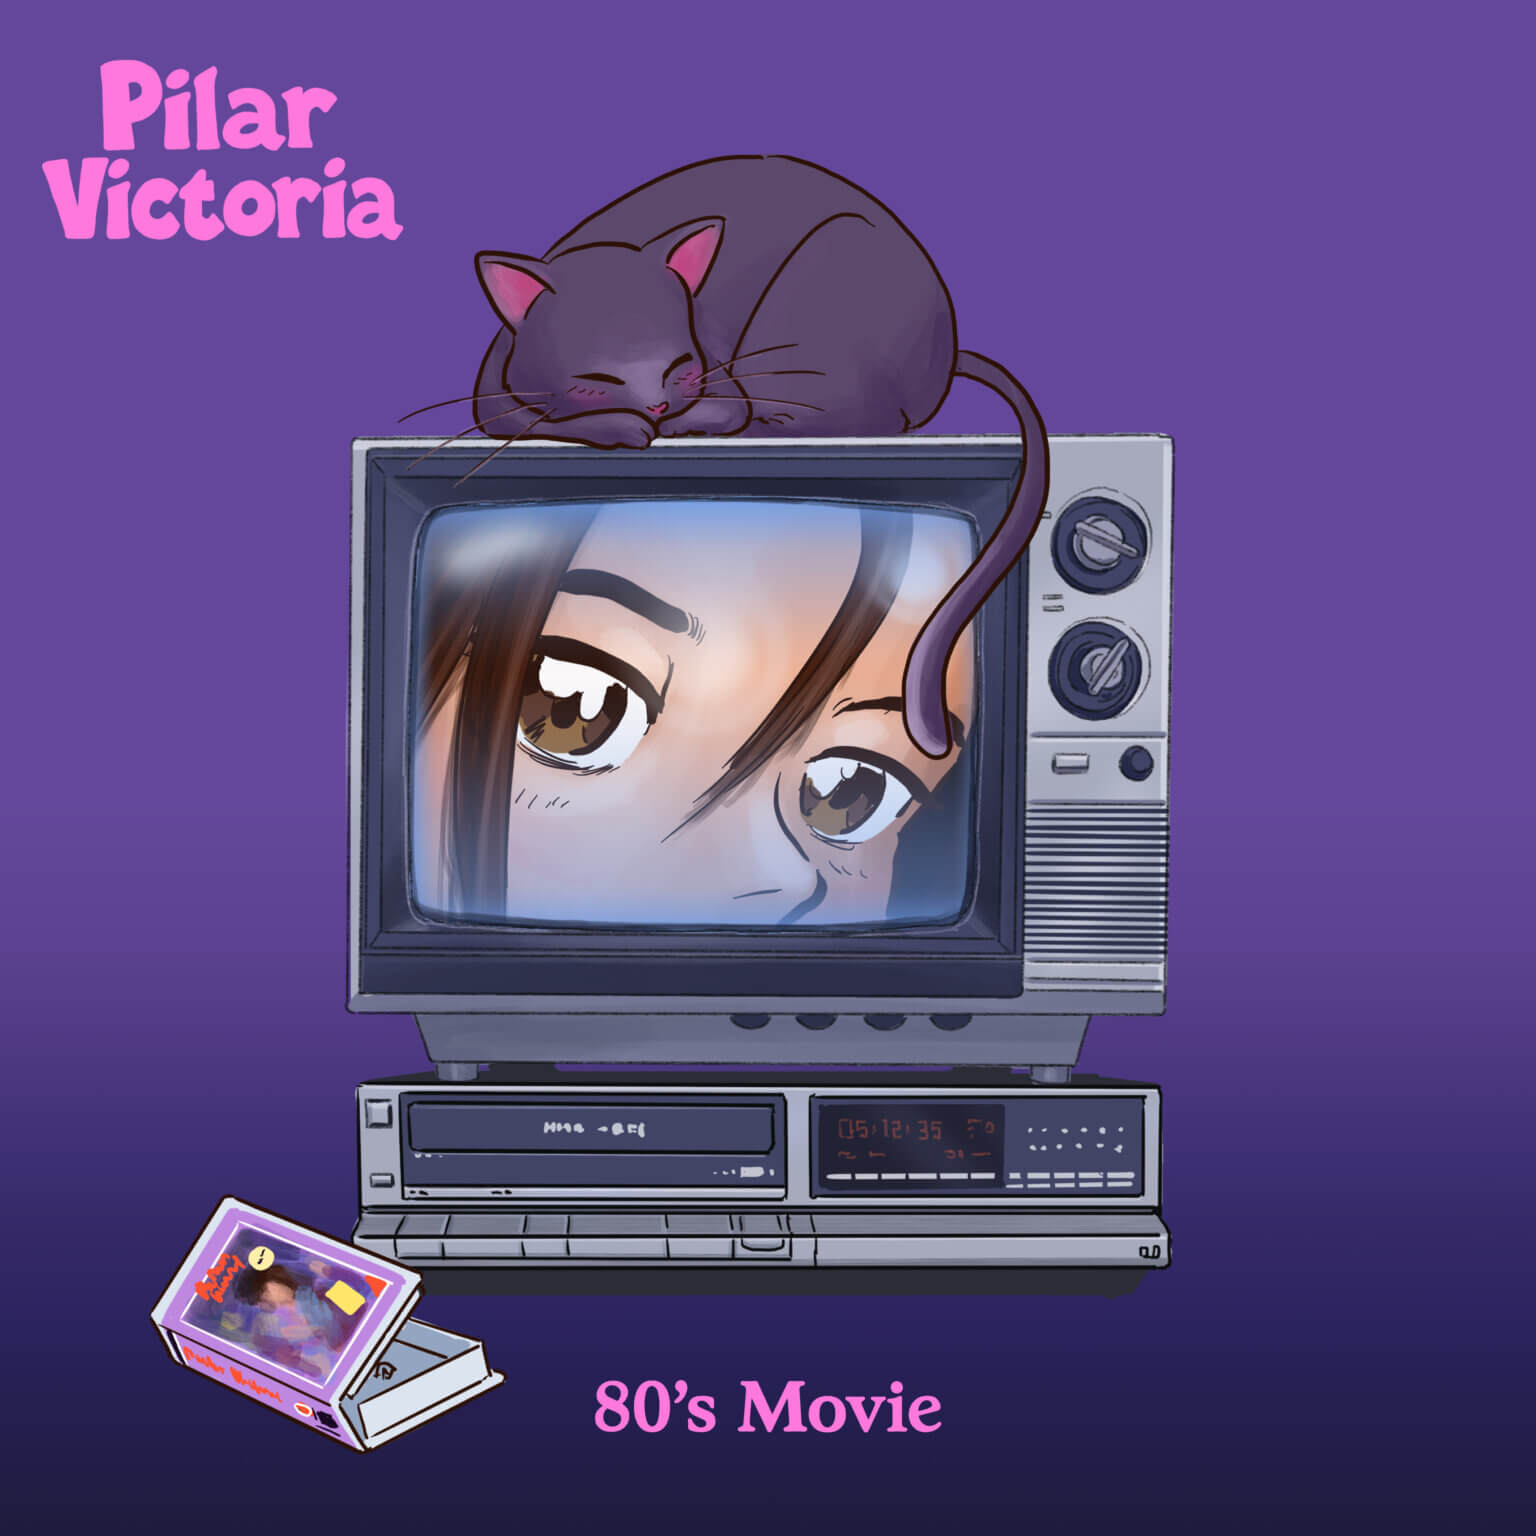 “80’s Movie” By Pilar Victoria is Northern Transmissions Song of the Day